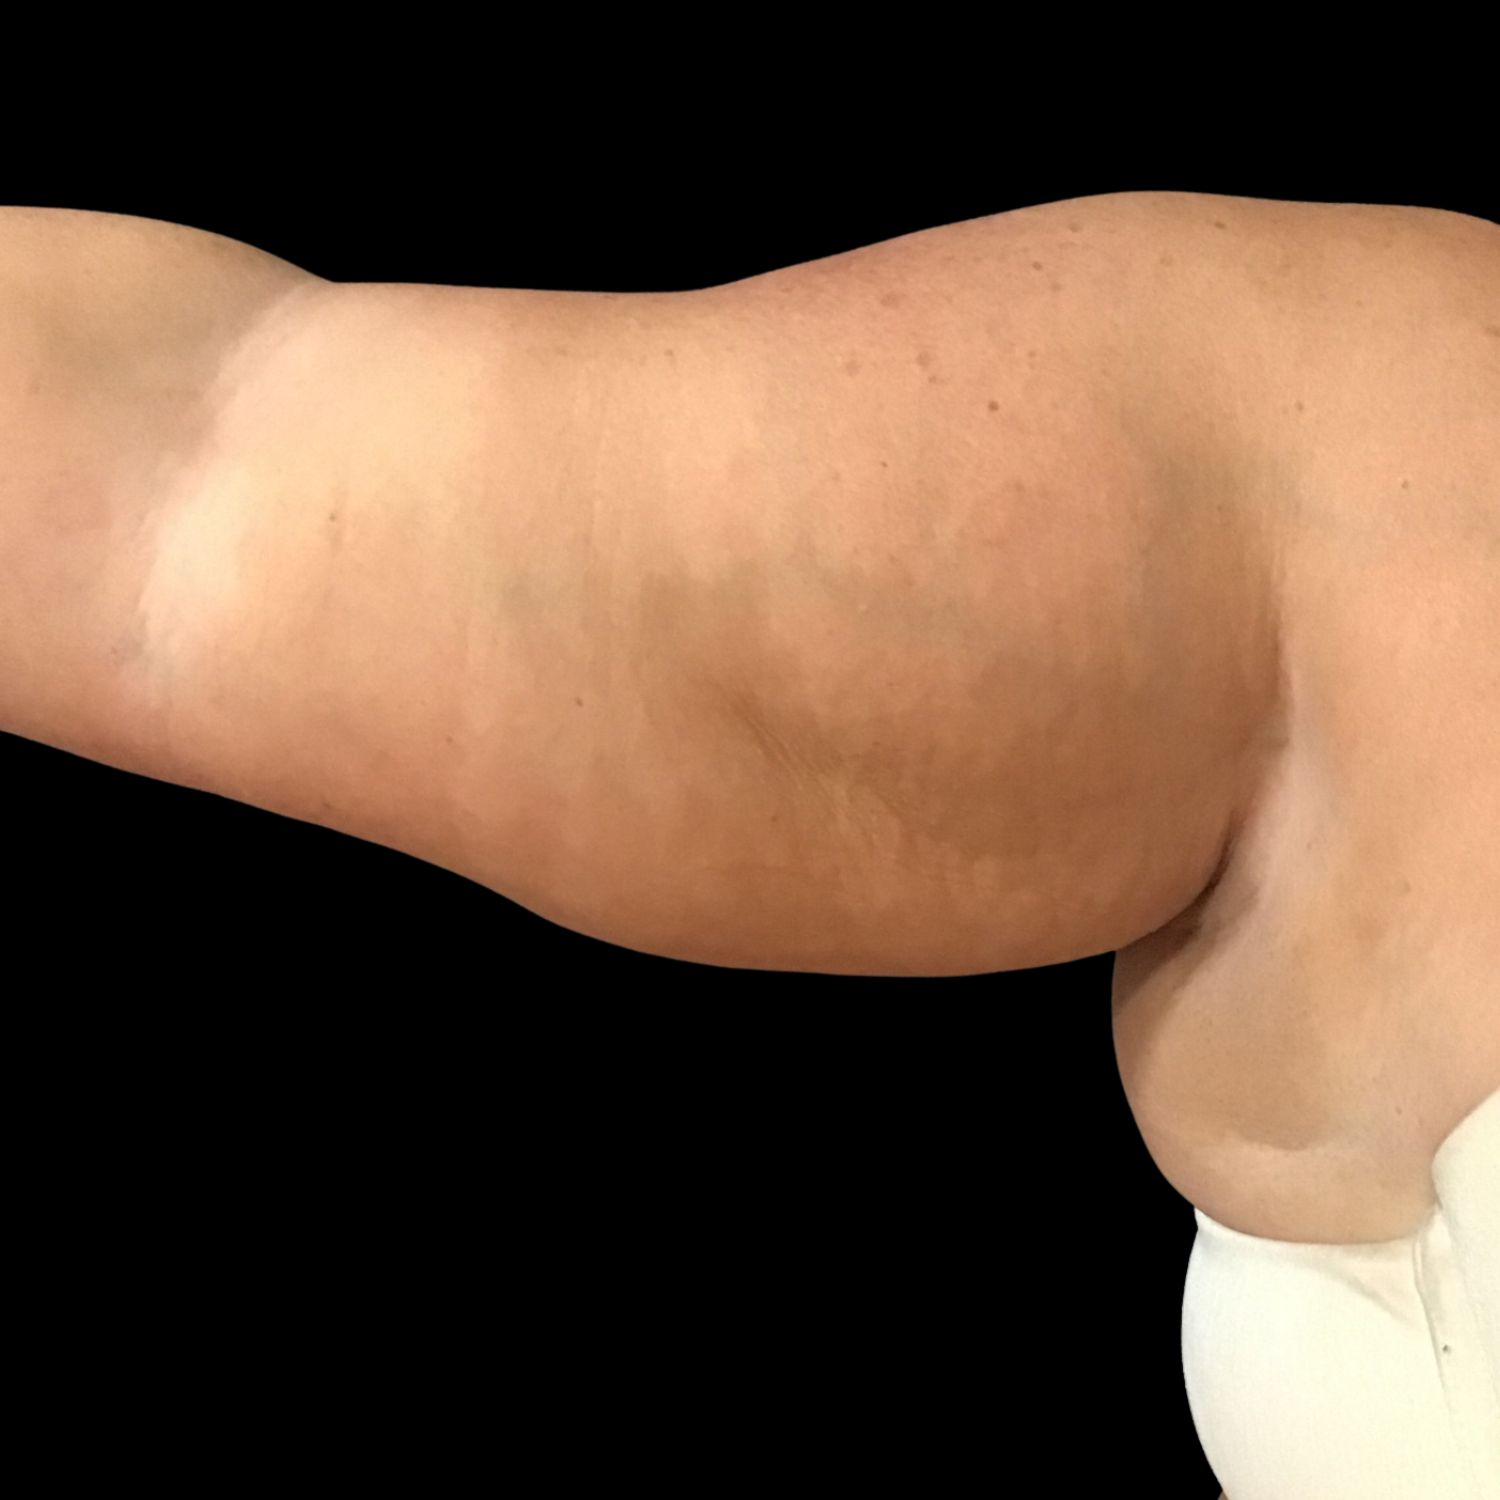 Arm liposuction results